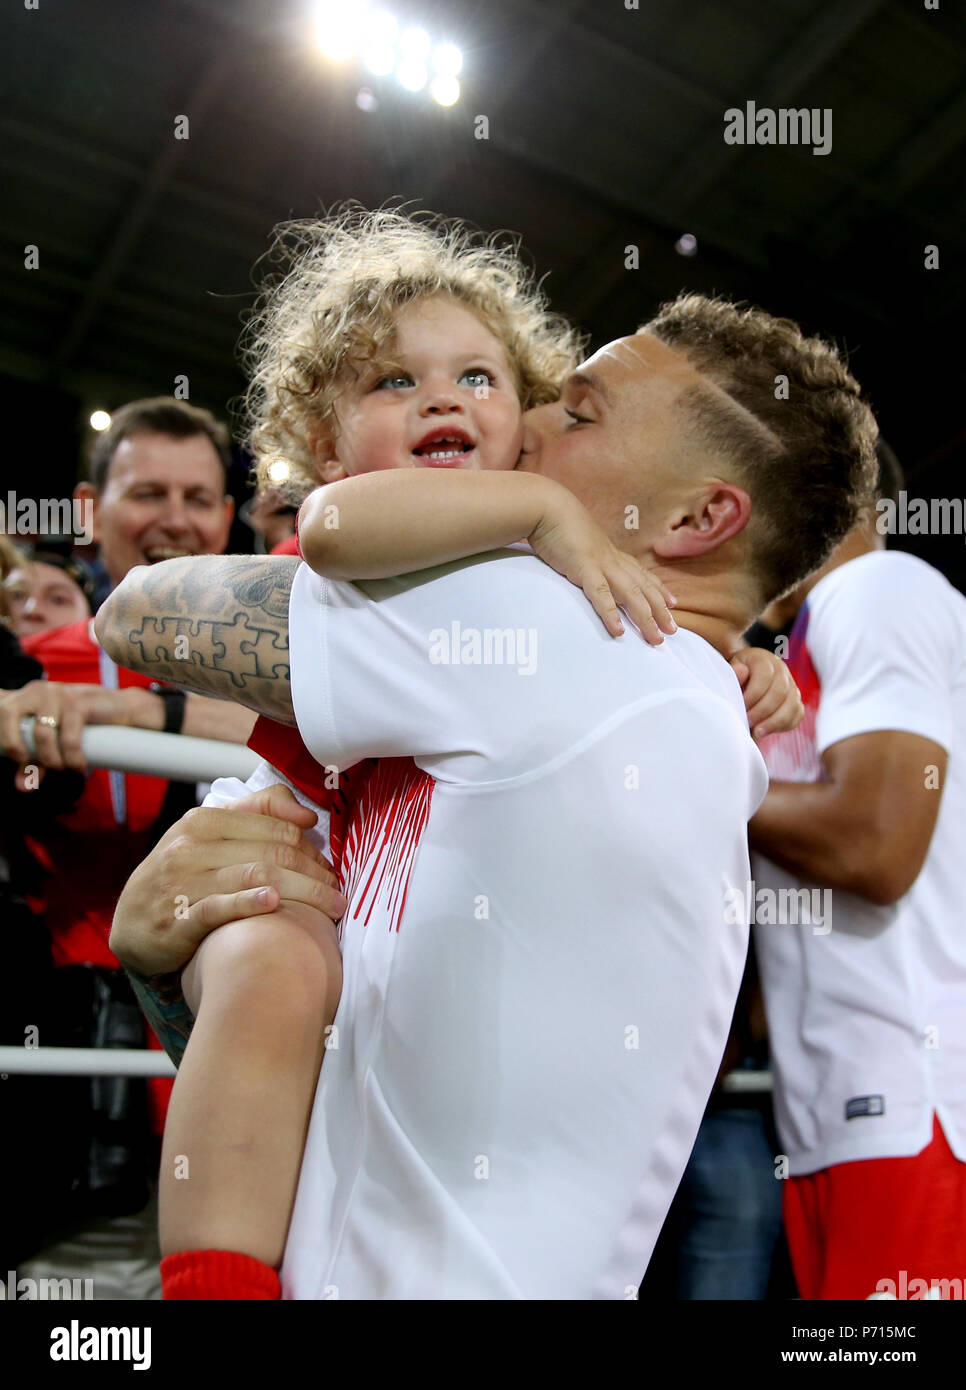 England's Kieran Trippier celebrates with his son after winning the FIFA World Cup 2018, round of 16 match at the Spartak Stadium, Moscow. Stock Photo